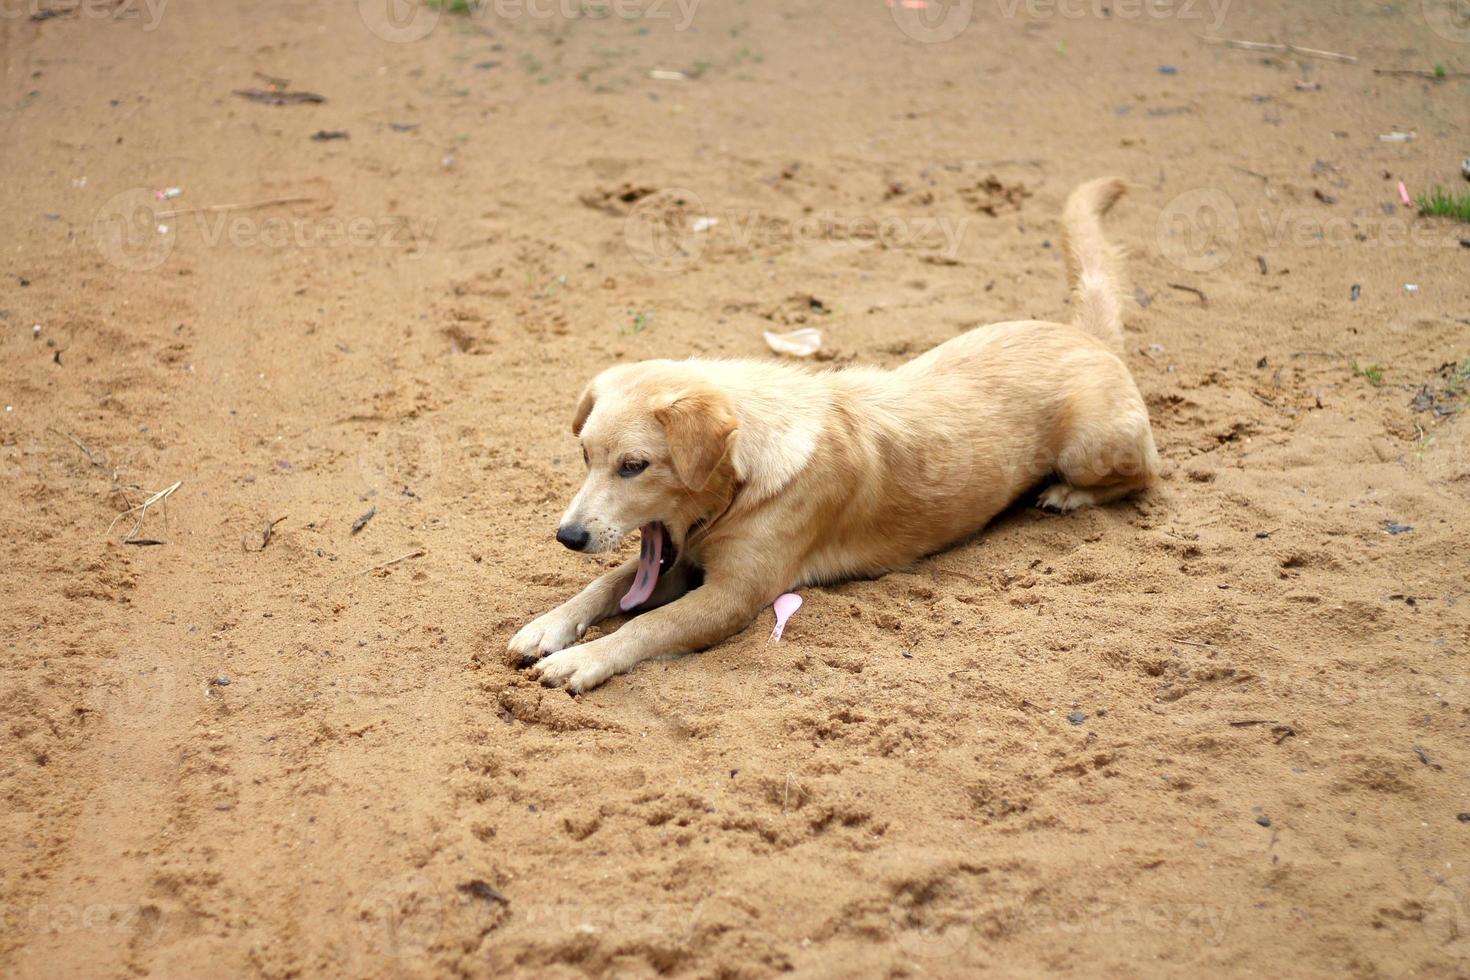 puppy yoga on the sand. photo